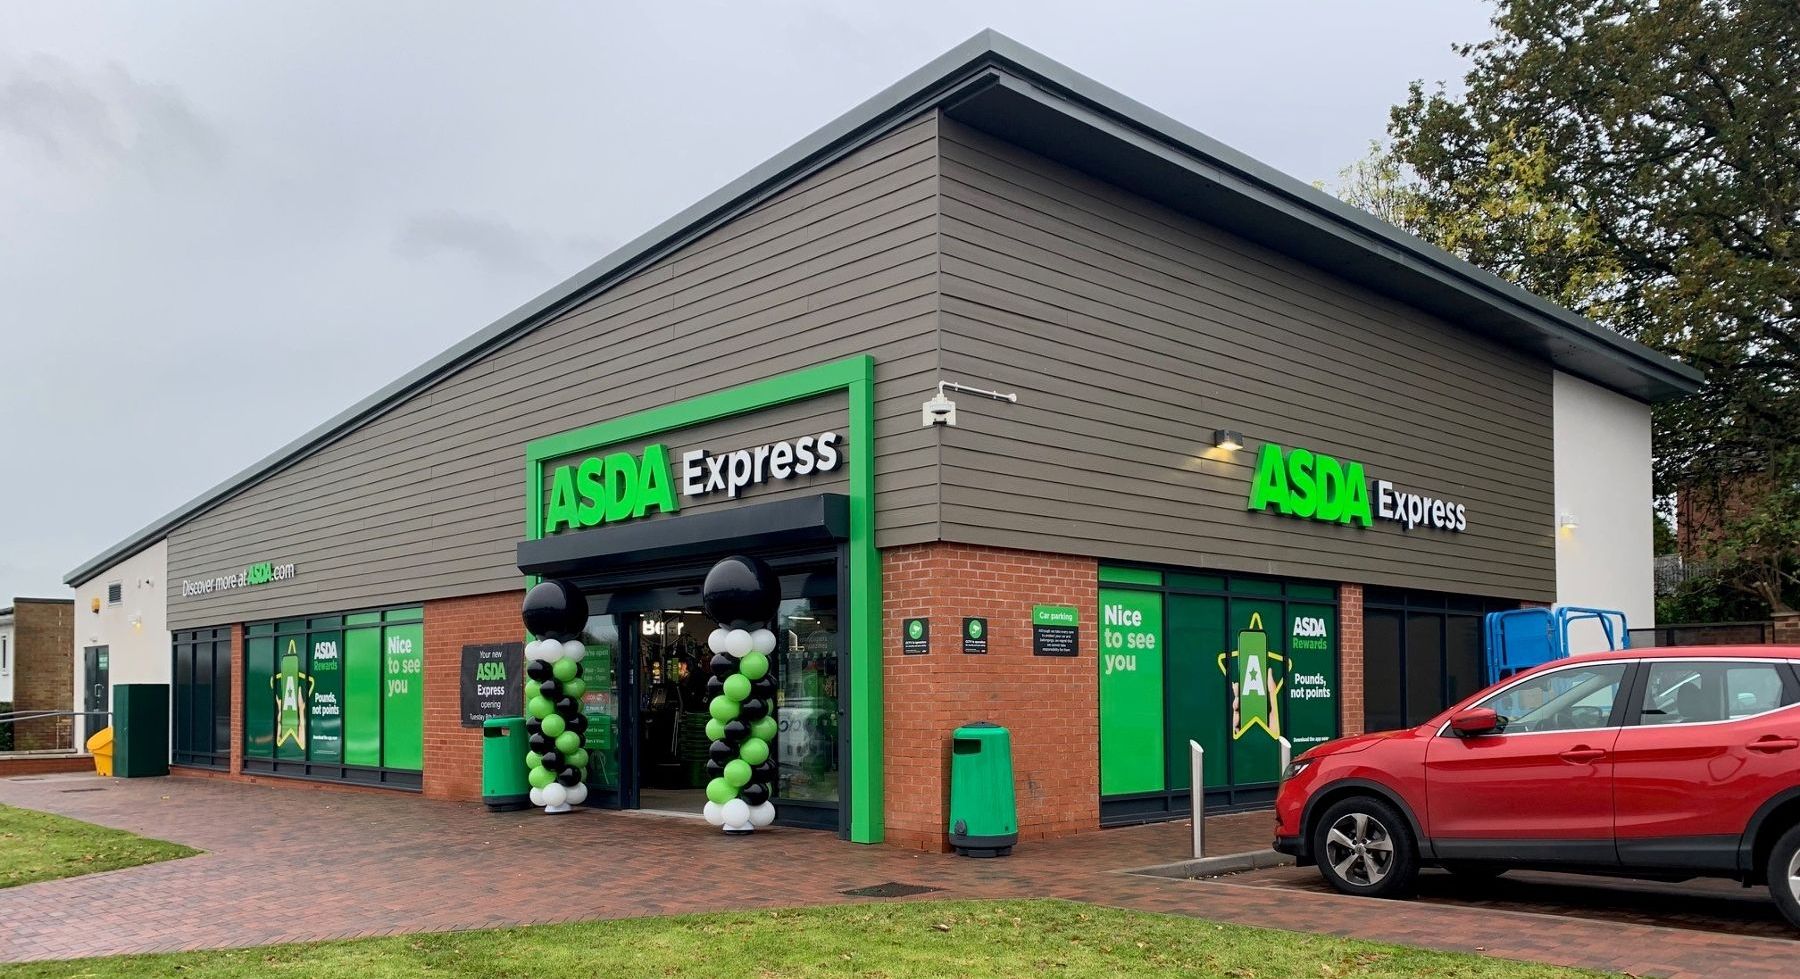 The new Asda Express store in Sutton Coldfield (Photo by Asda)